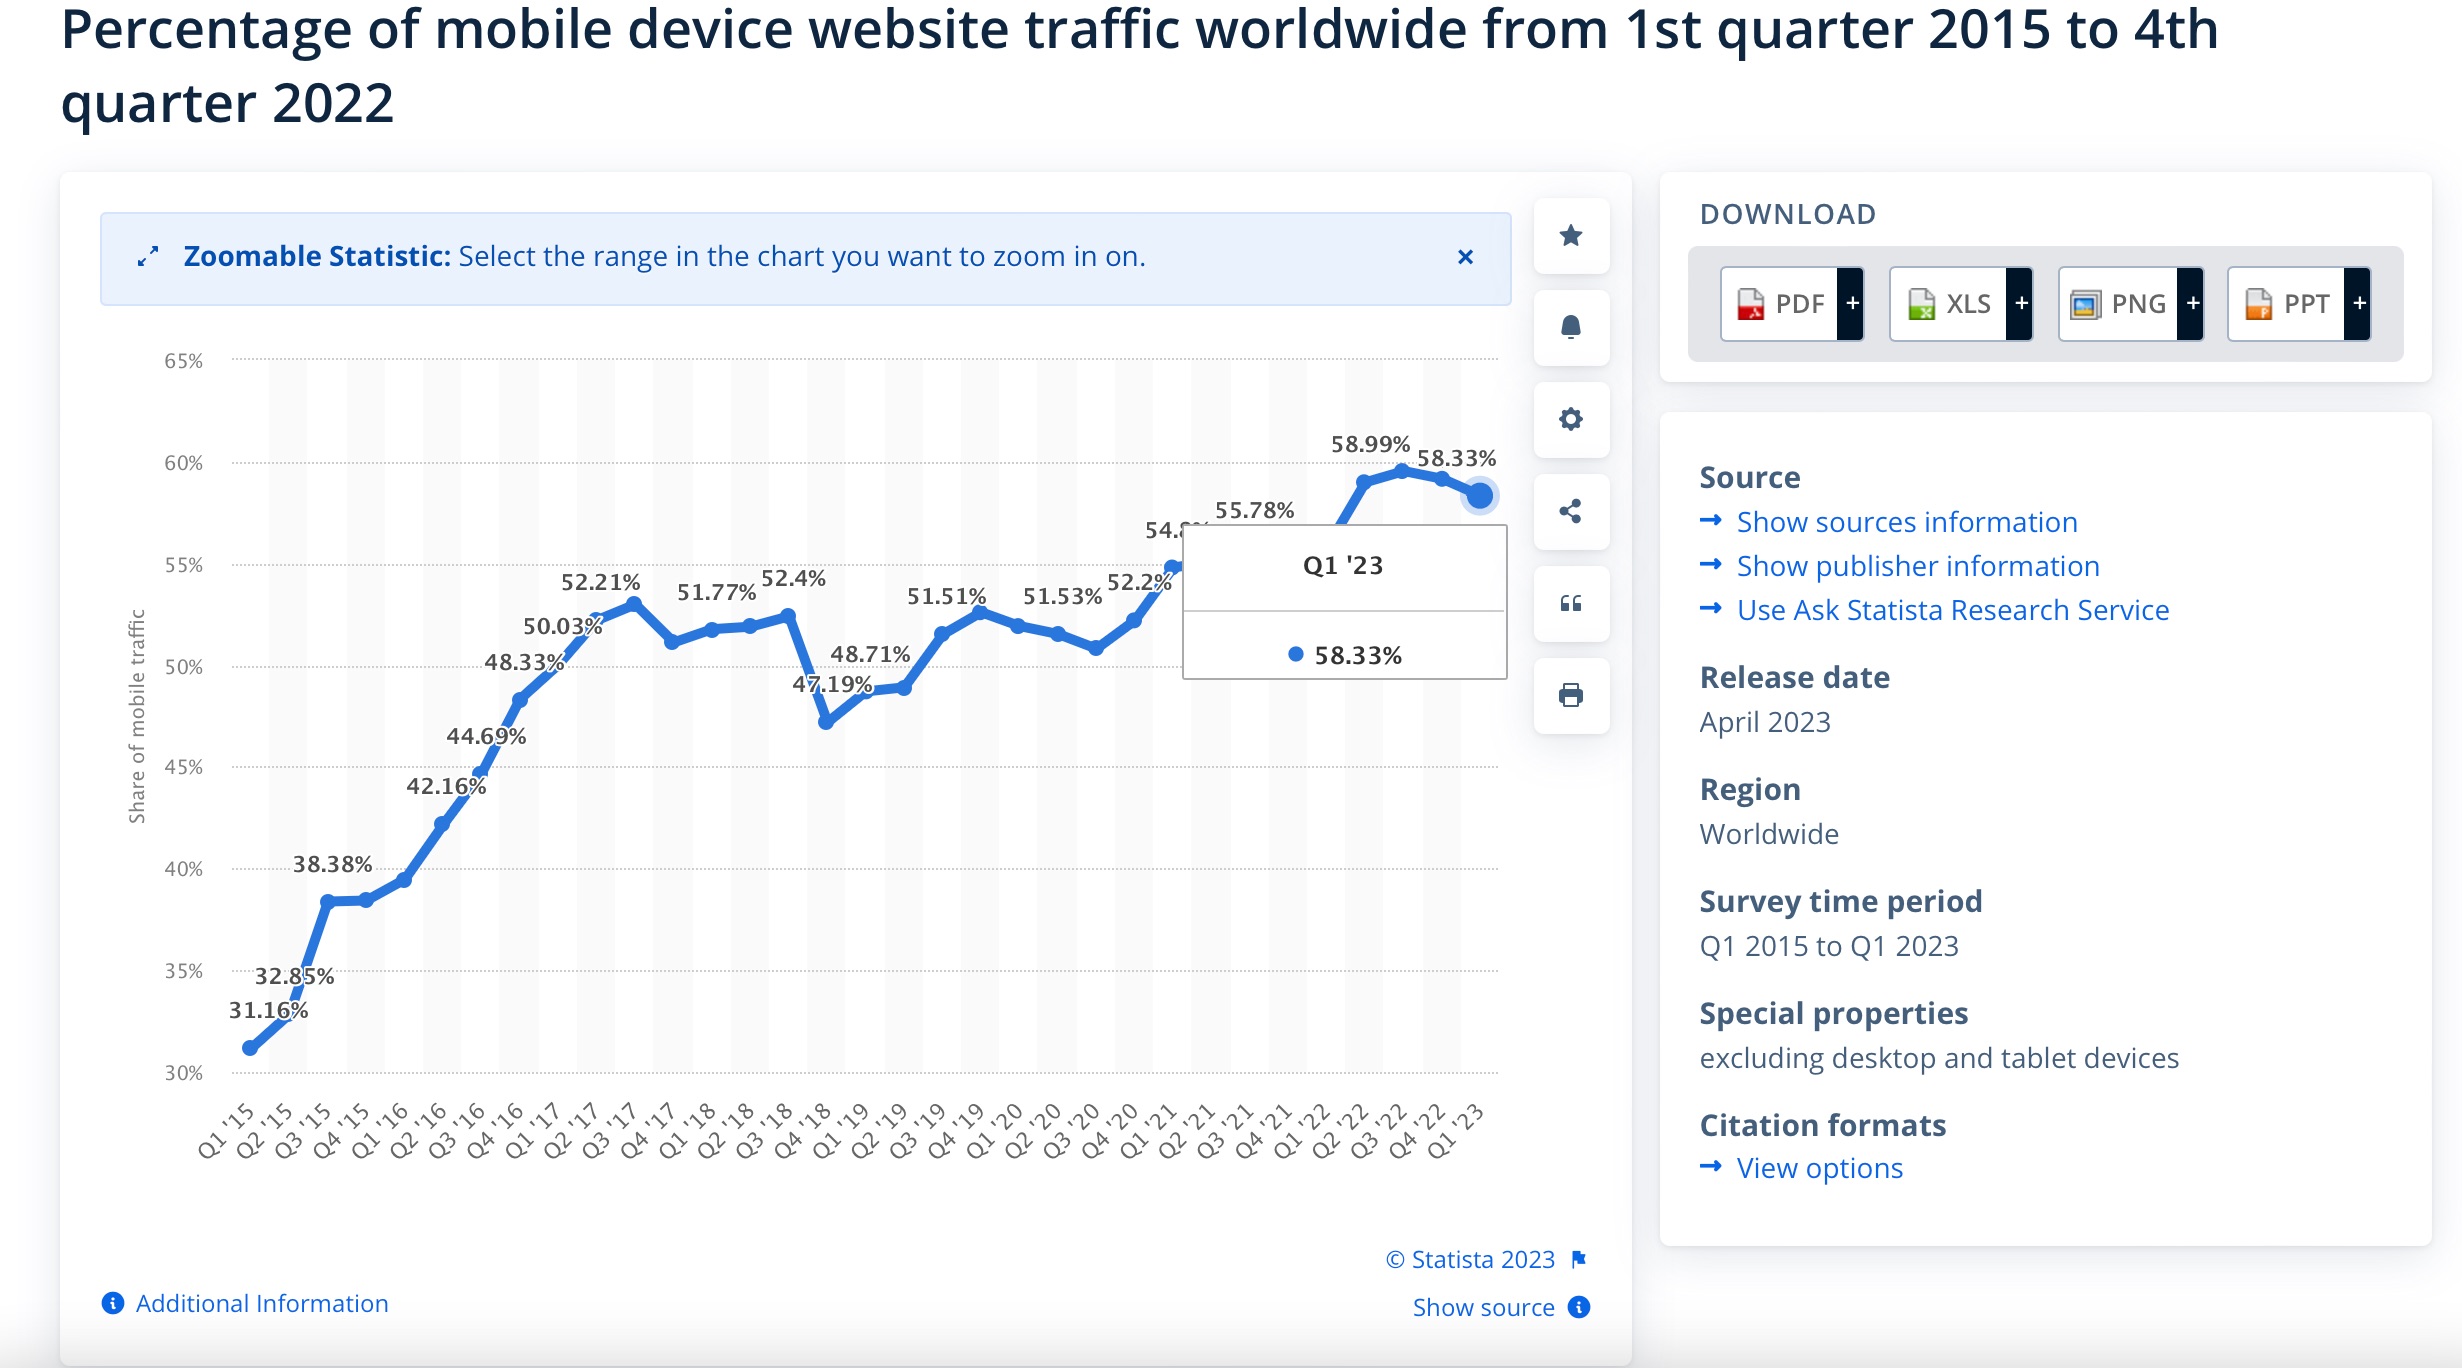 Percentage of mobile device website traffic